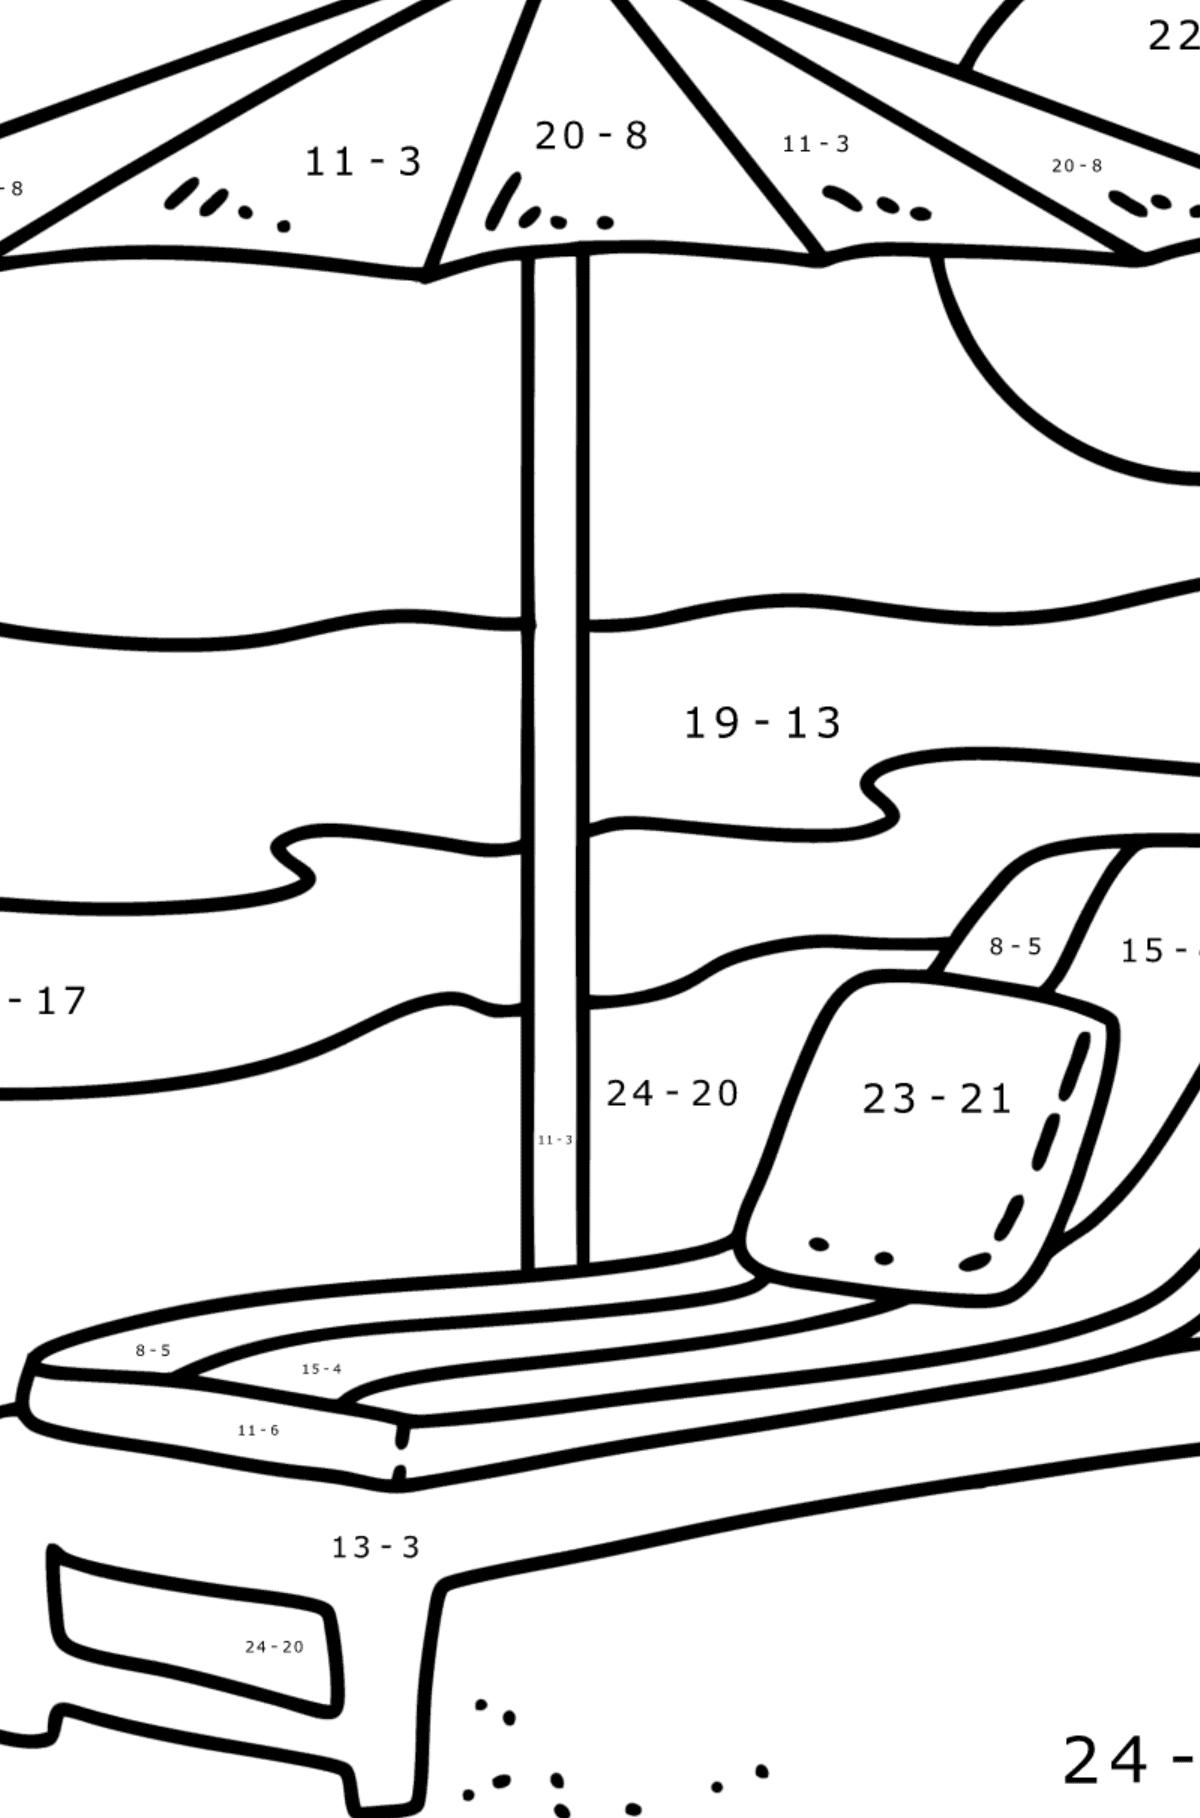 Summer Coloring page - Beach umbrella and Sun lounger - Math Coloring - Subtraction for Kids